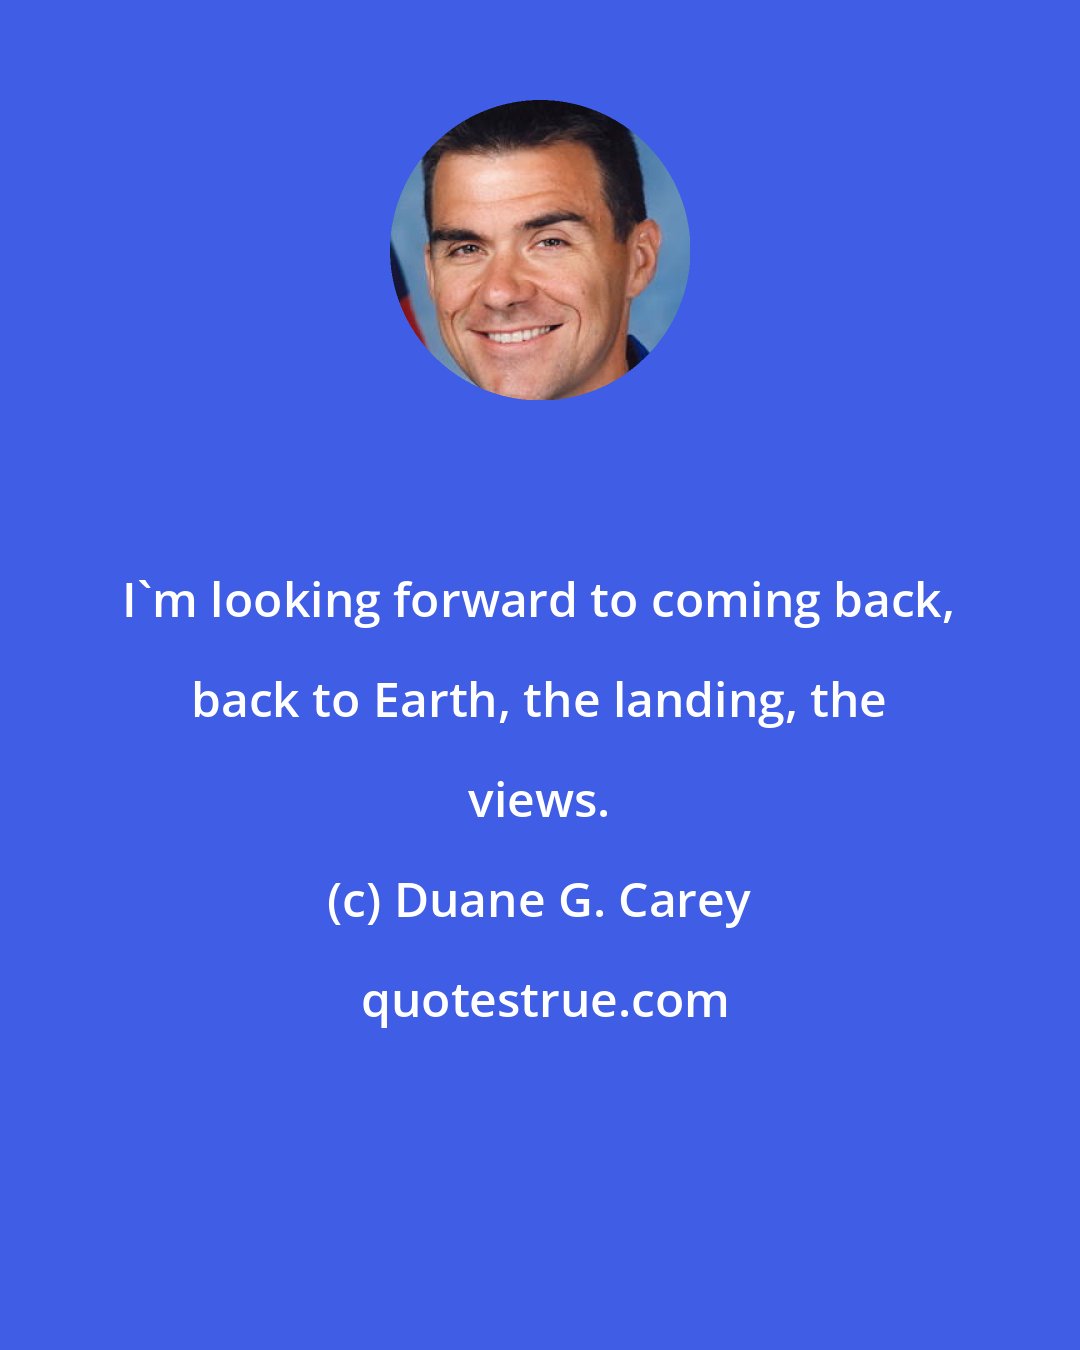 Duane G. Carey: I'm looking forward to coming back, back to Earth, the landing, the views.